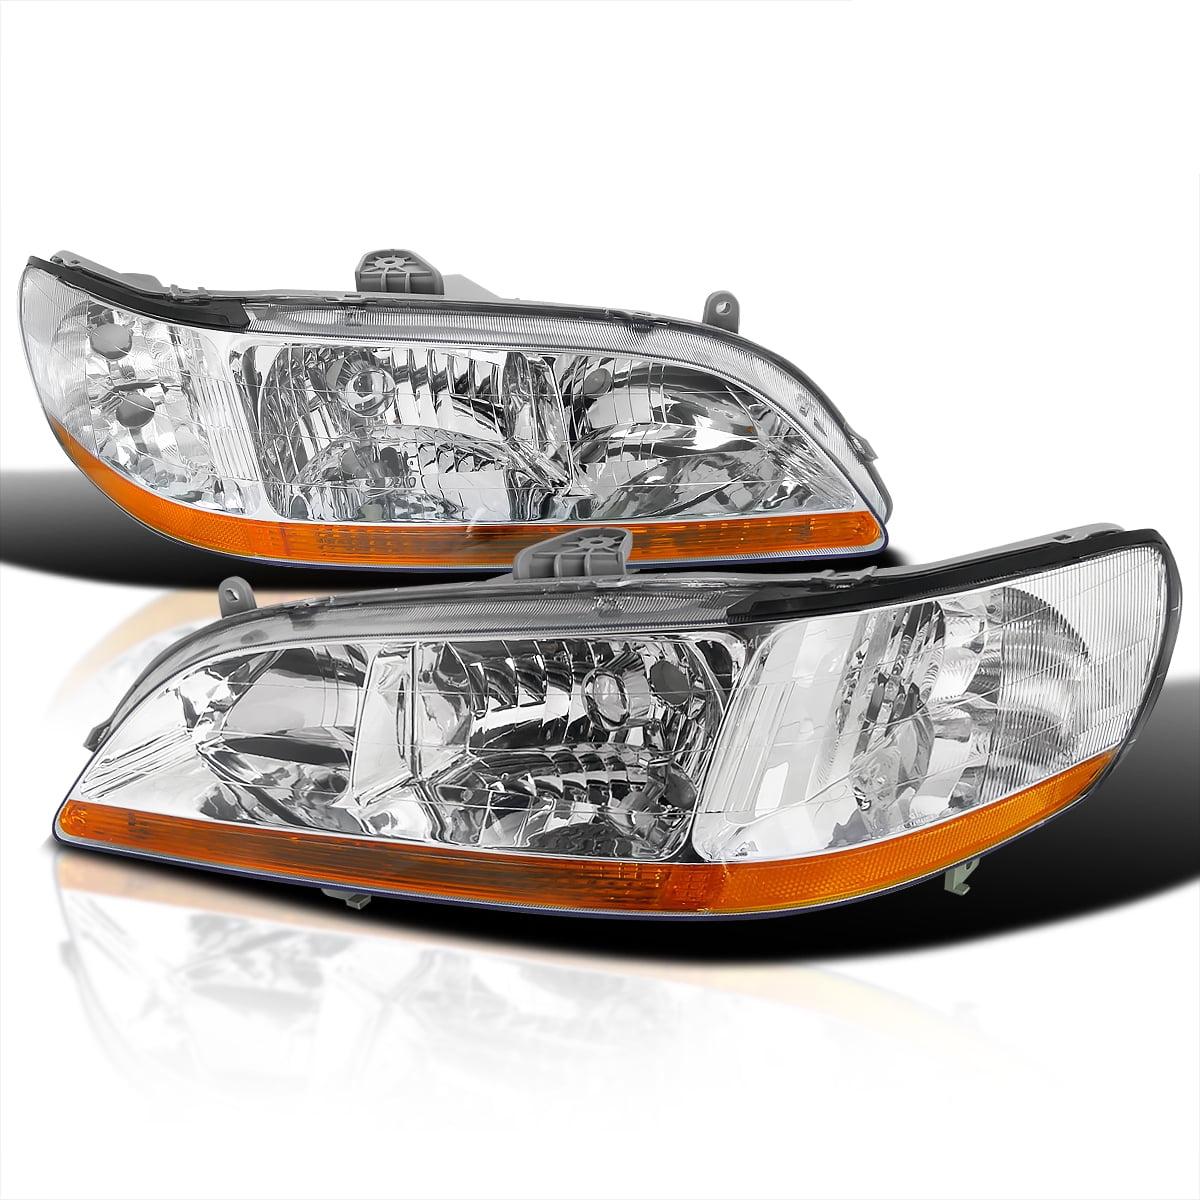 Pair of Chrome Housing Clear Corner Headlight Assembly Lamps Replacement for Honda Accord CG 98-02 